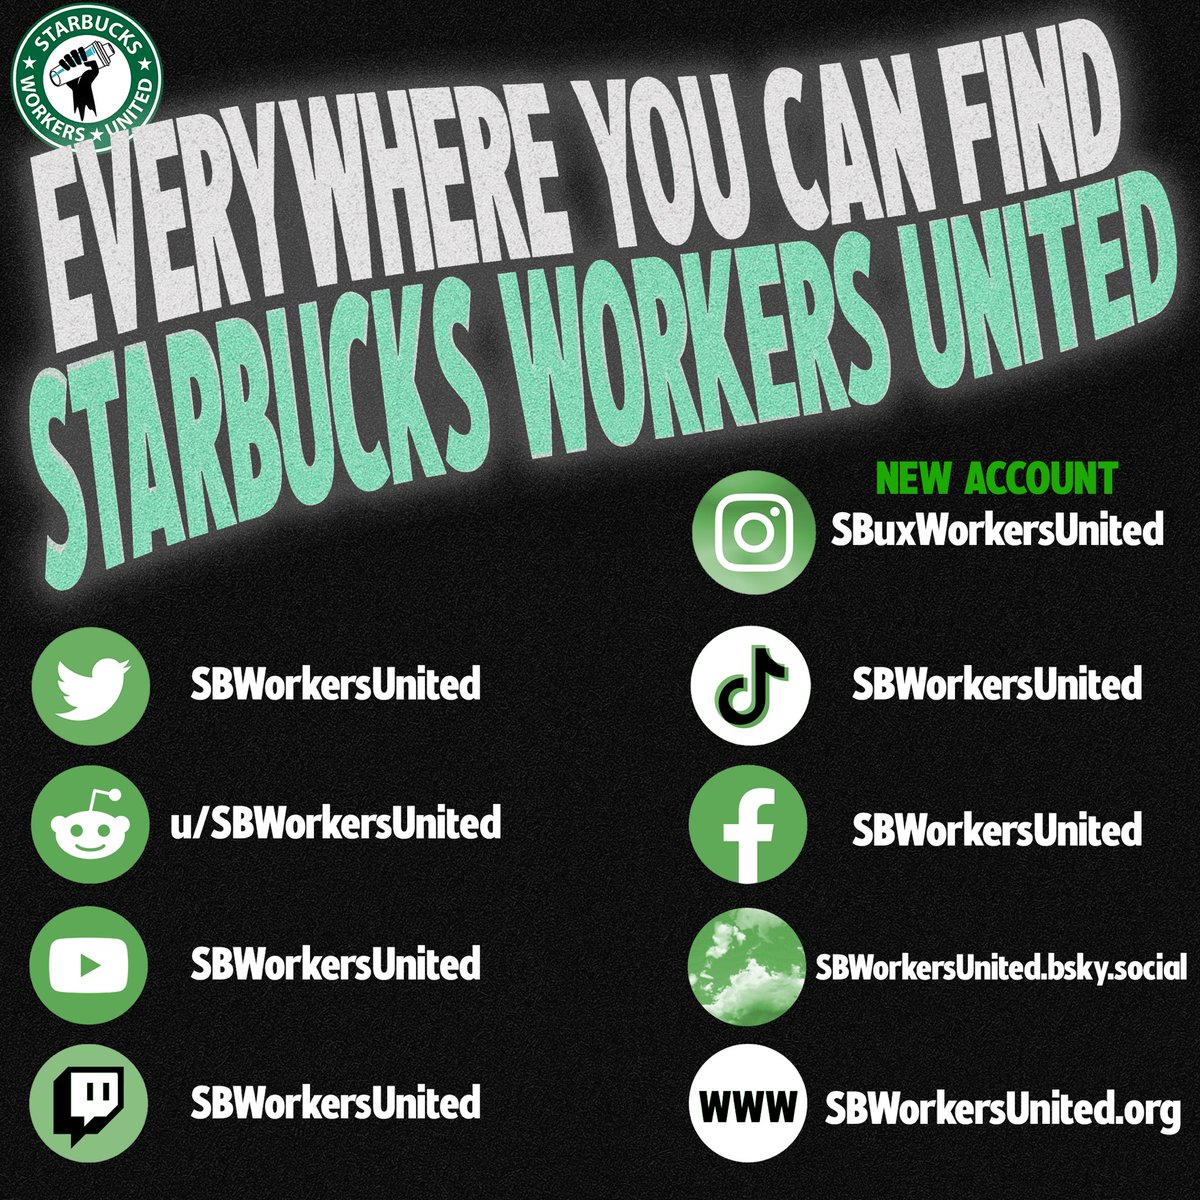 Please help us rebuild our account on Instagram until Meta fixes this issue. You can follow us @ sbuxworkersunited instagram.com/sbuxworkersuni…